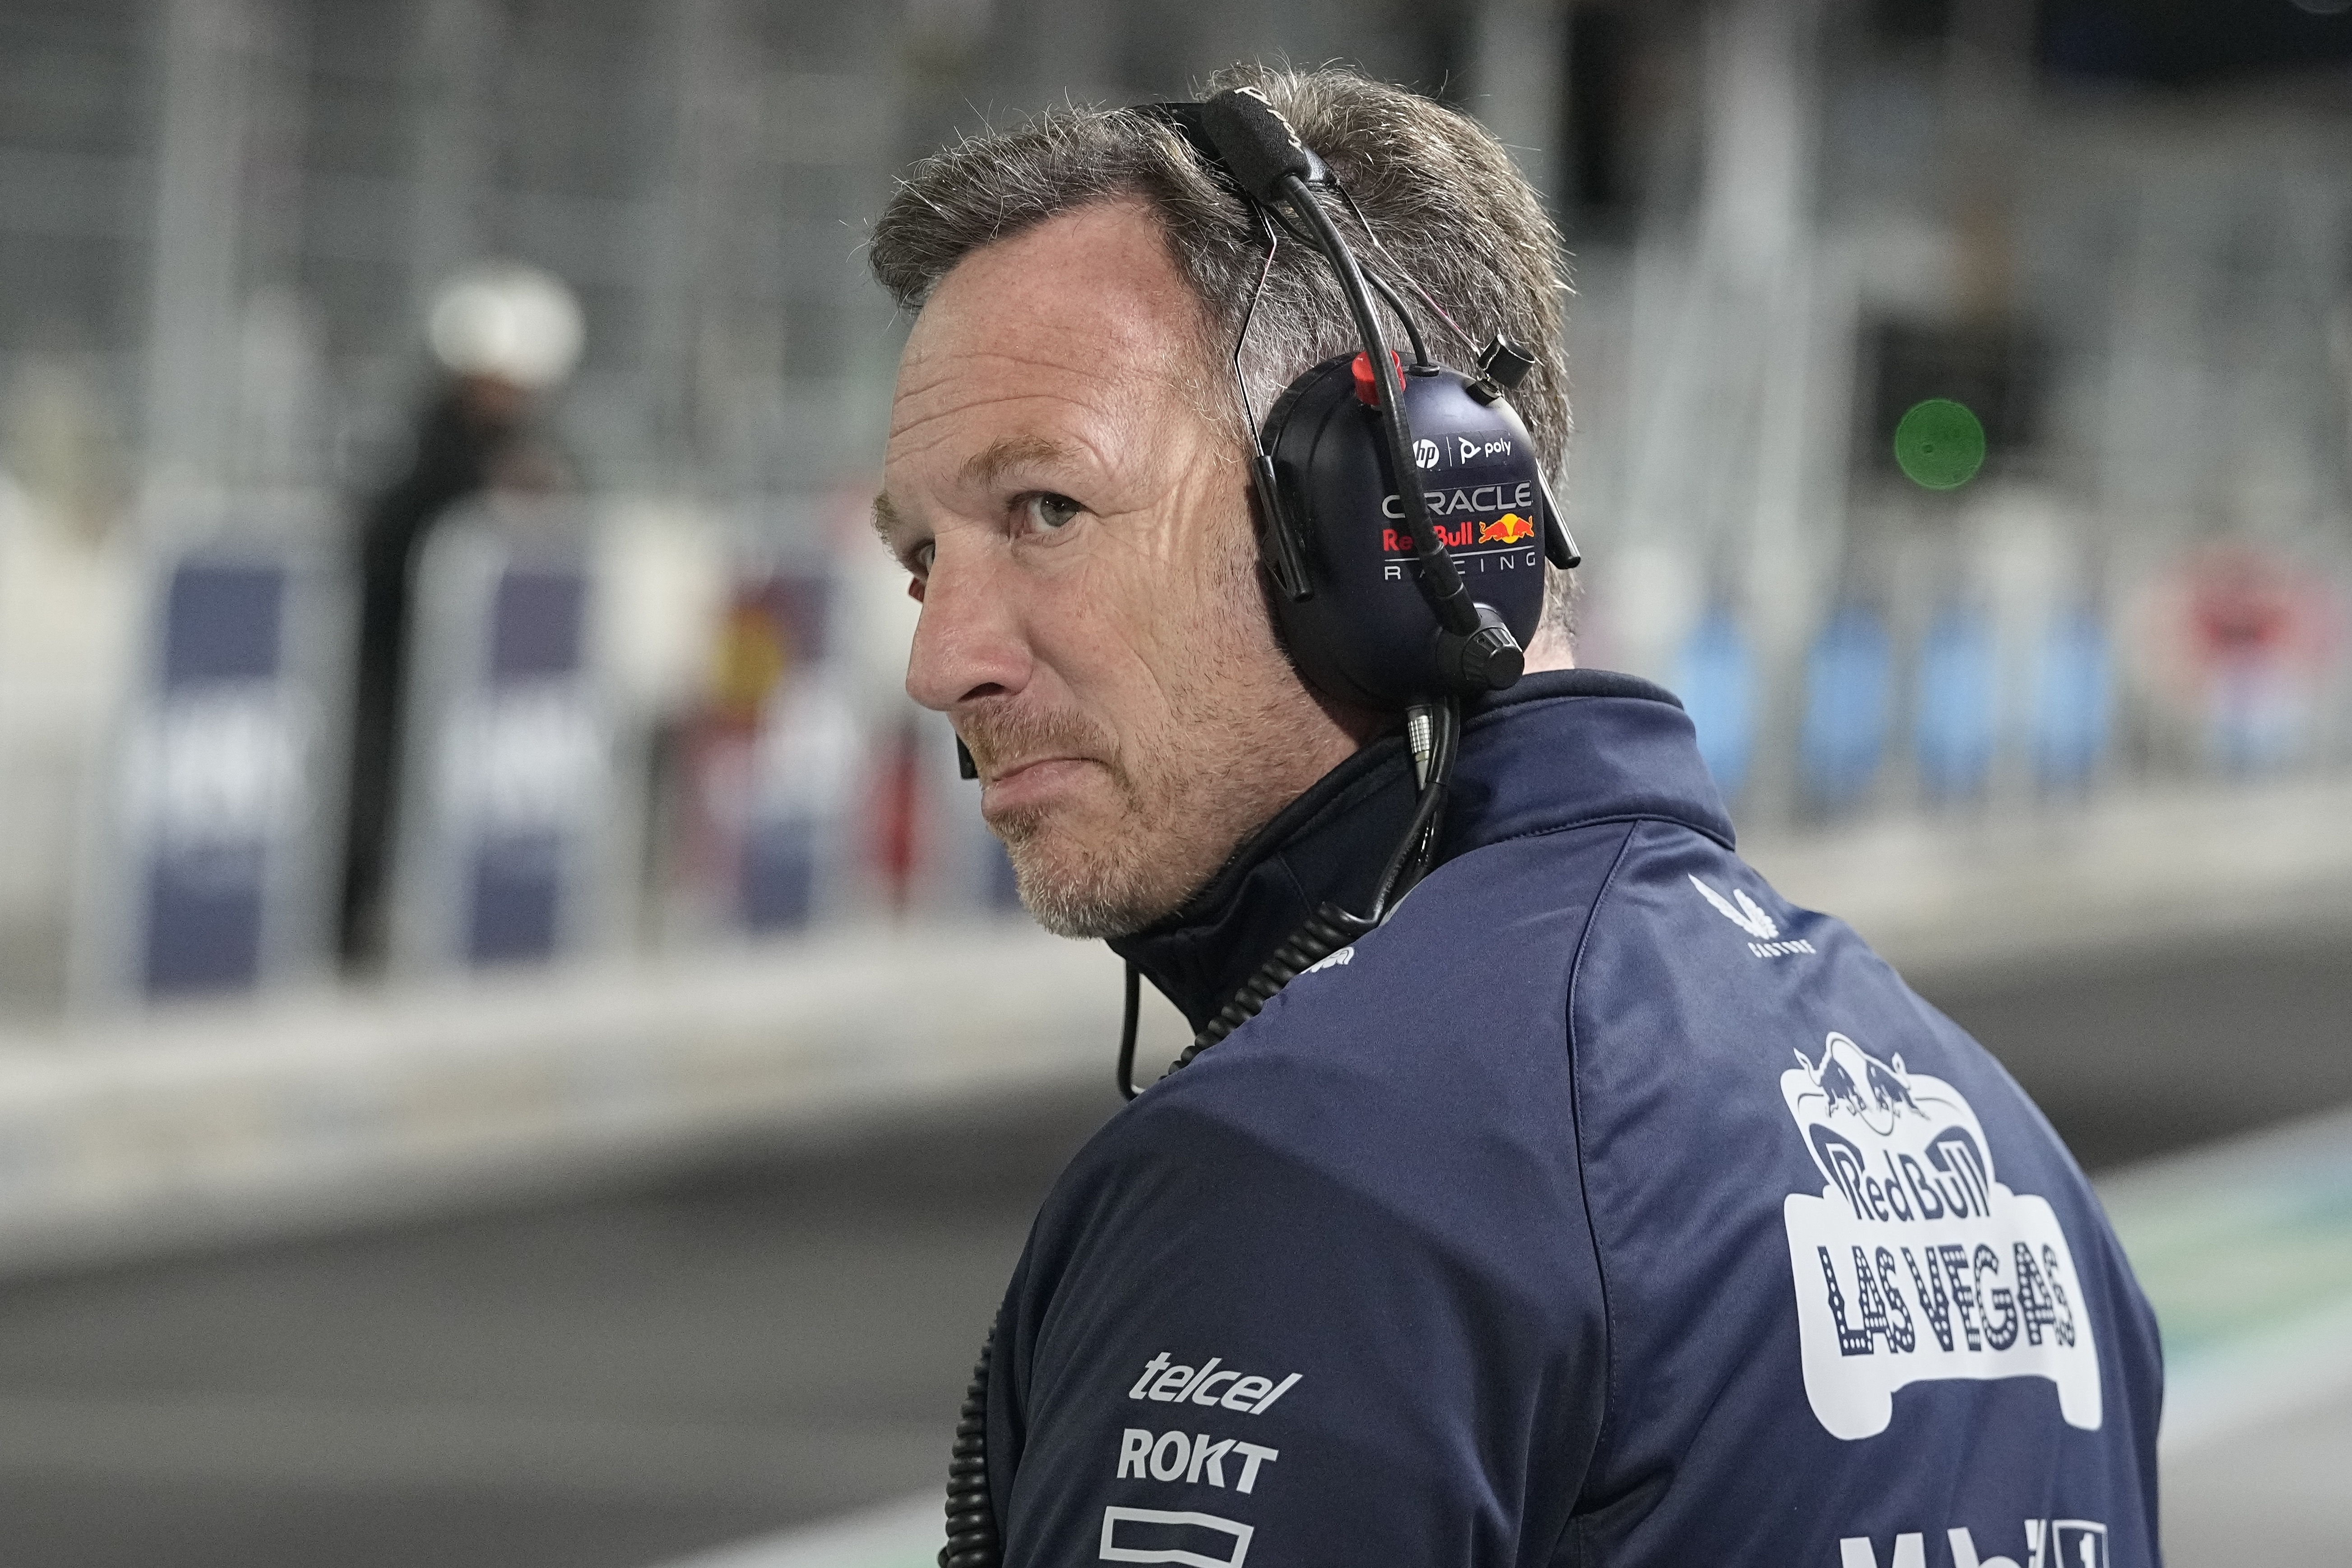 Christian Horner says he was approached by Lewis Hamilton's father Anthony